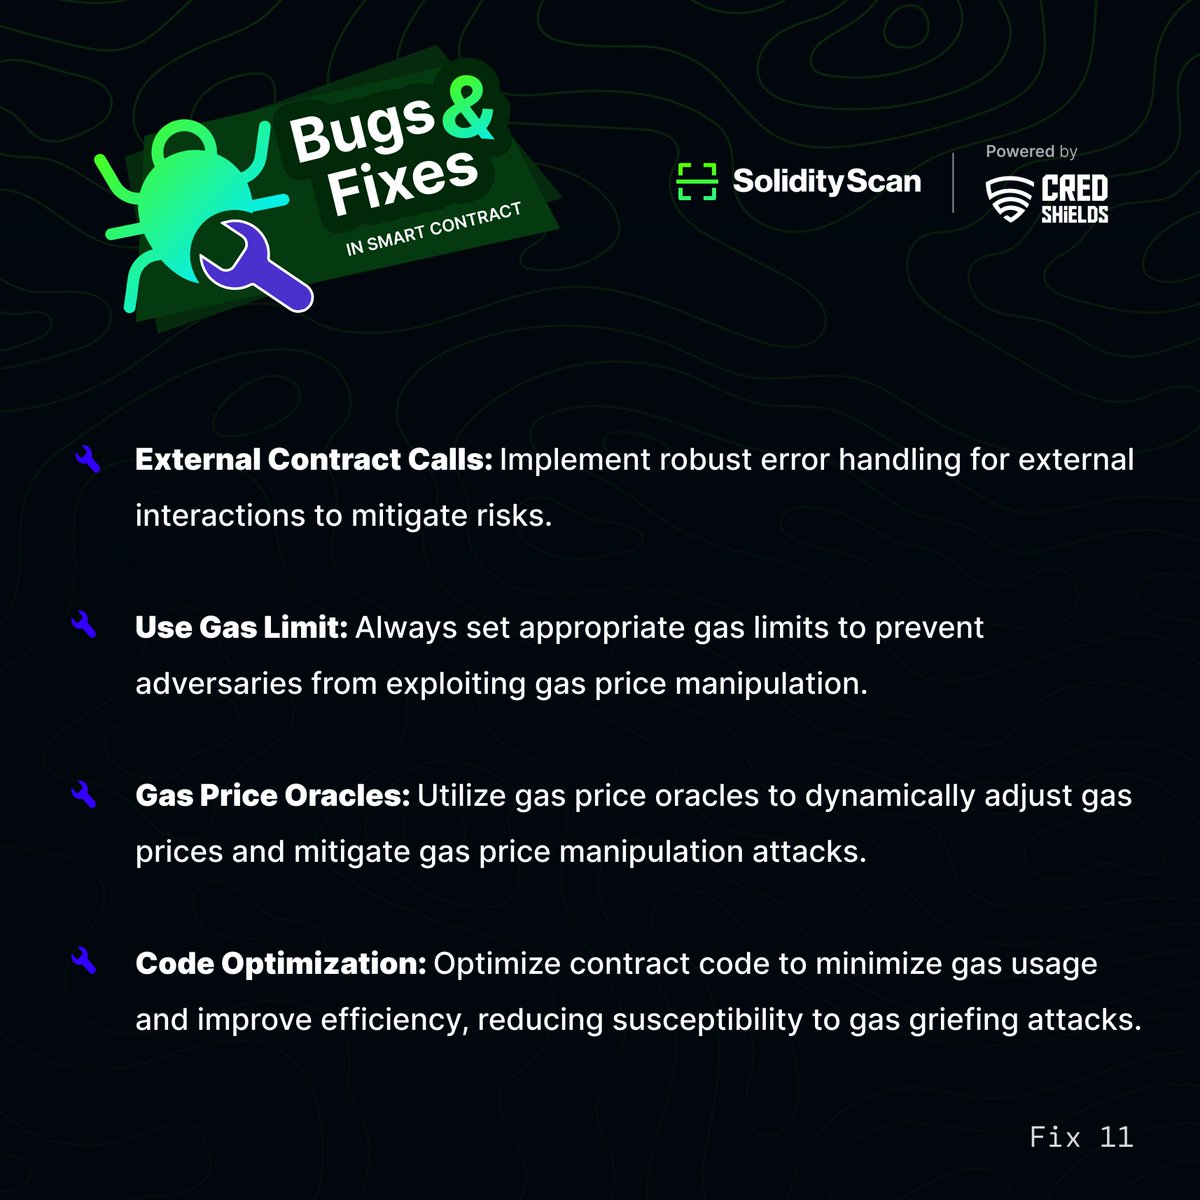 Let's tackle bugs head-on! Join us for expert fixes and smoother coding experiences. #BugHunt #Web3 #CyberSecurity